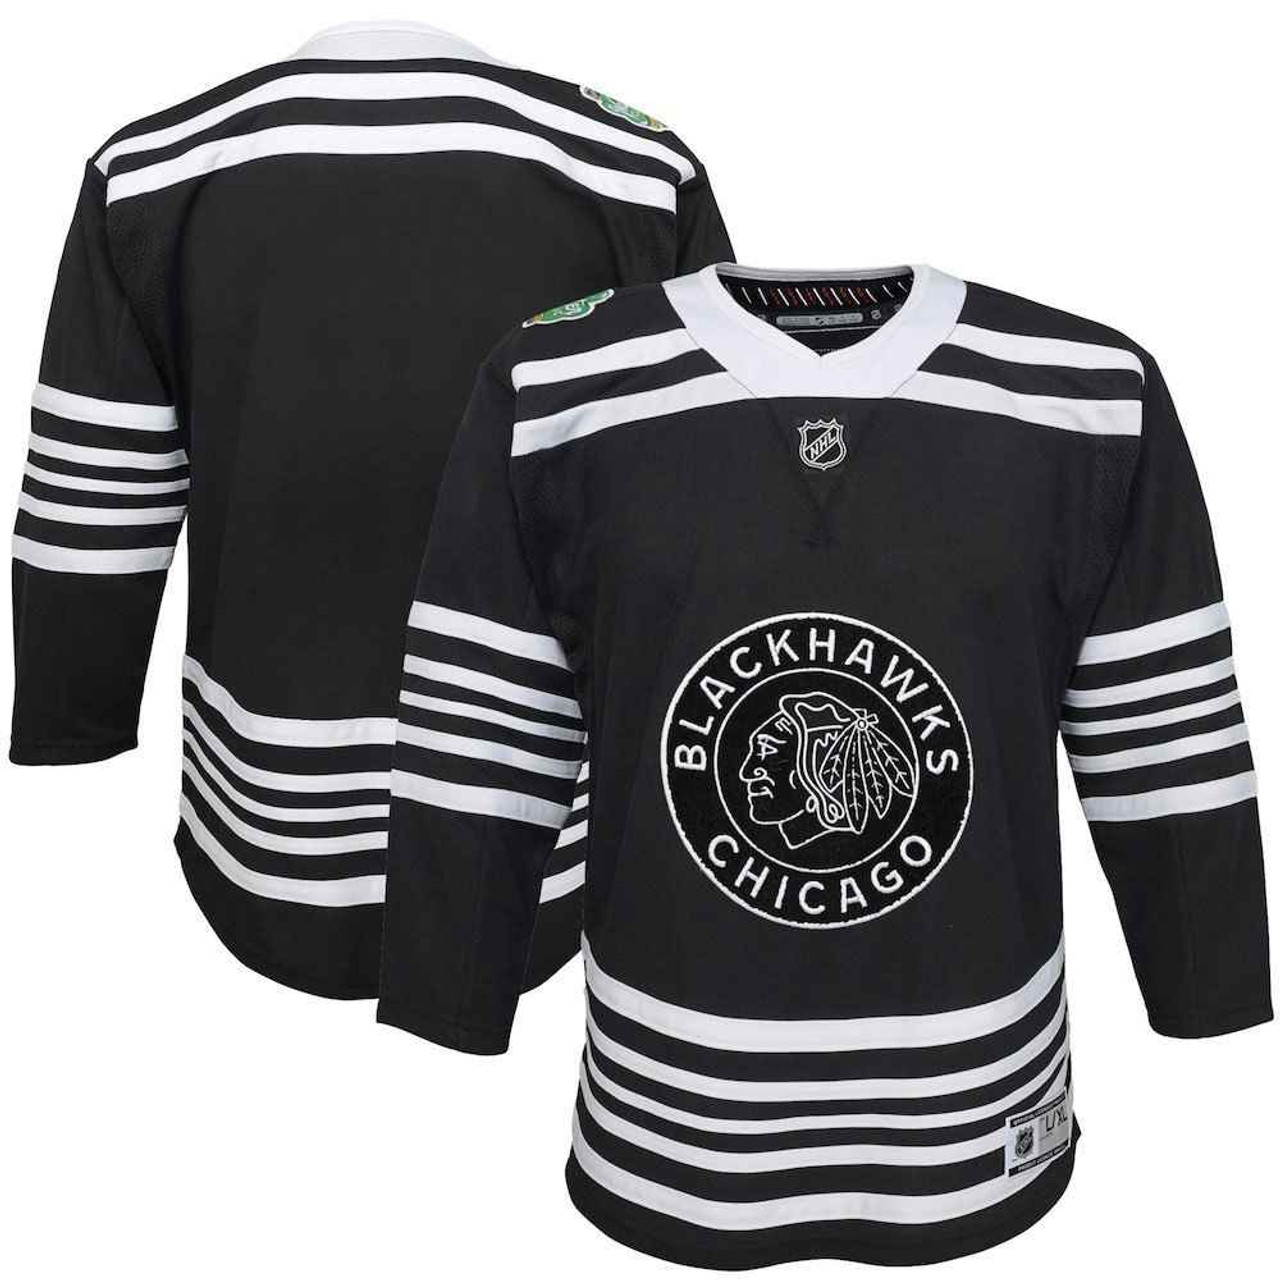 bruins youth winter classic jersey